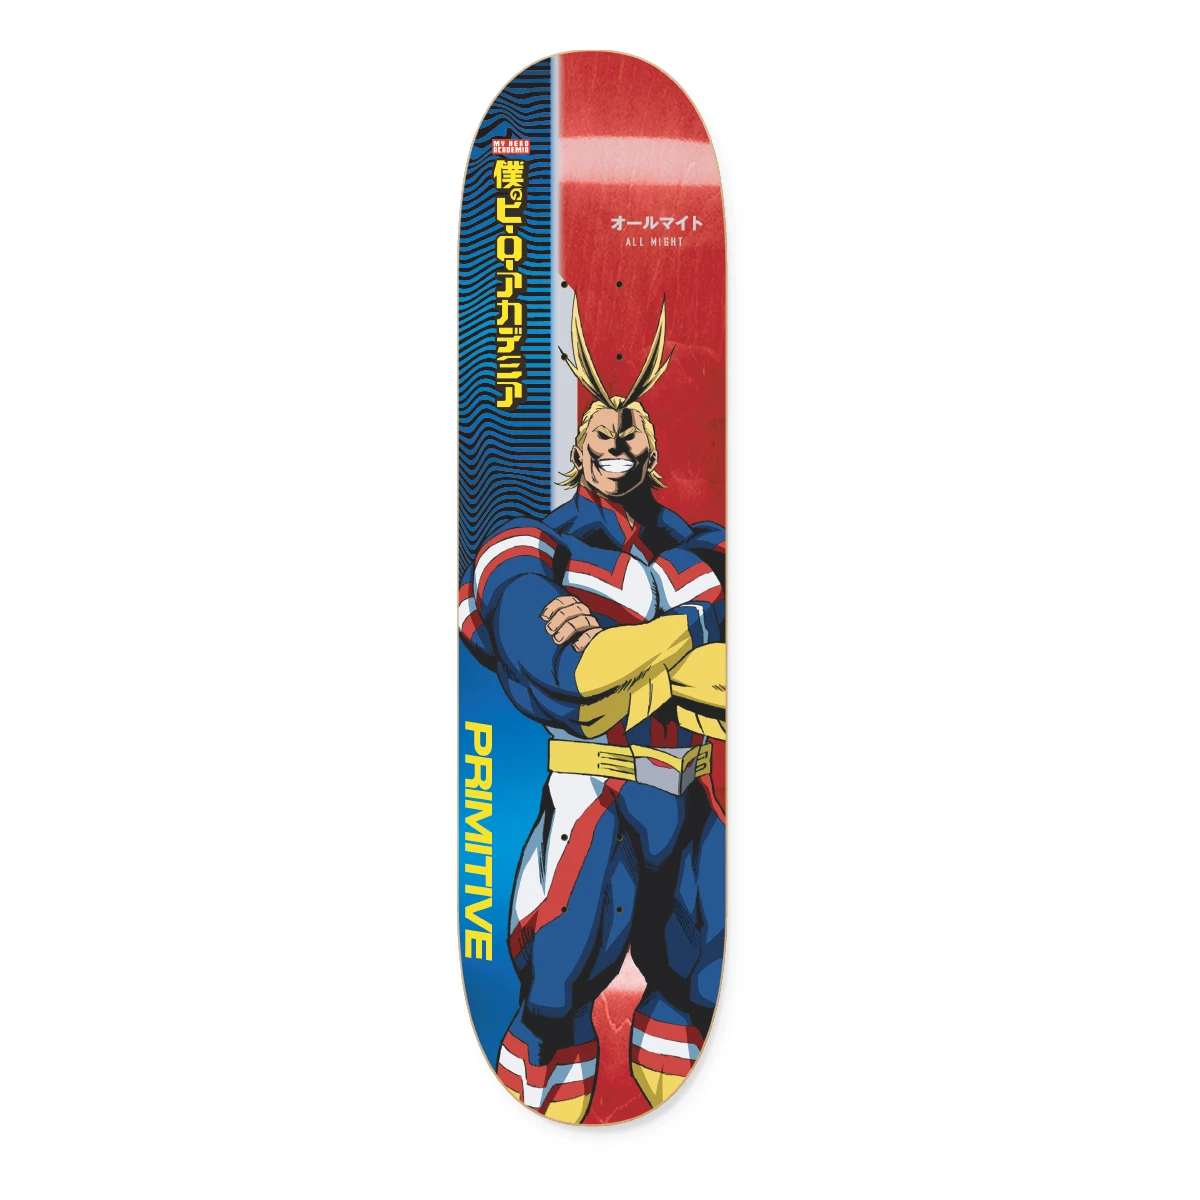 All Might Skateboard Deck 